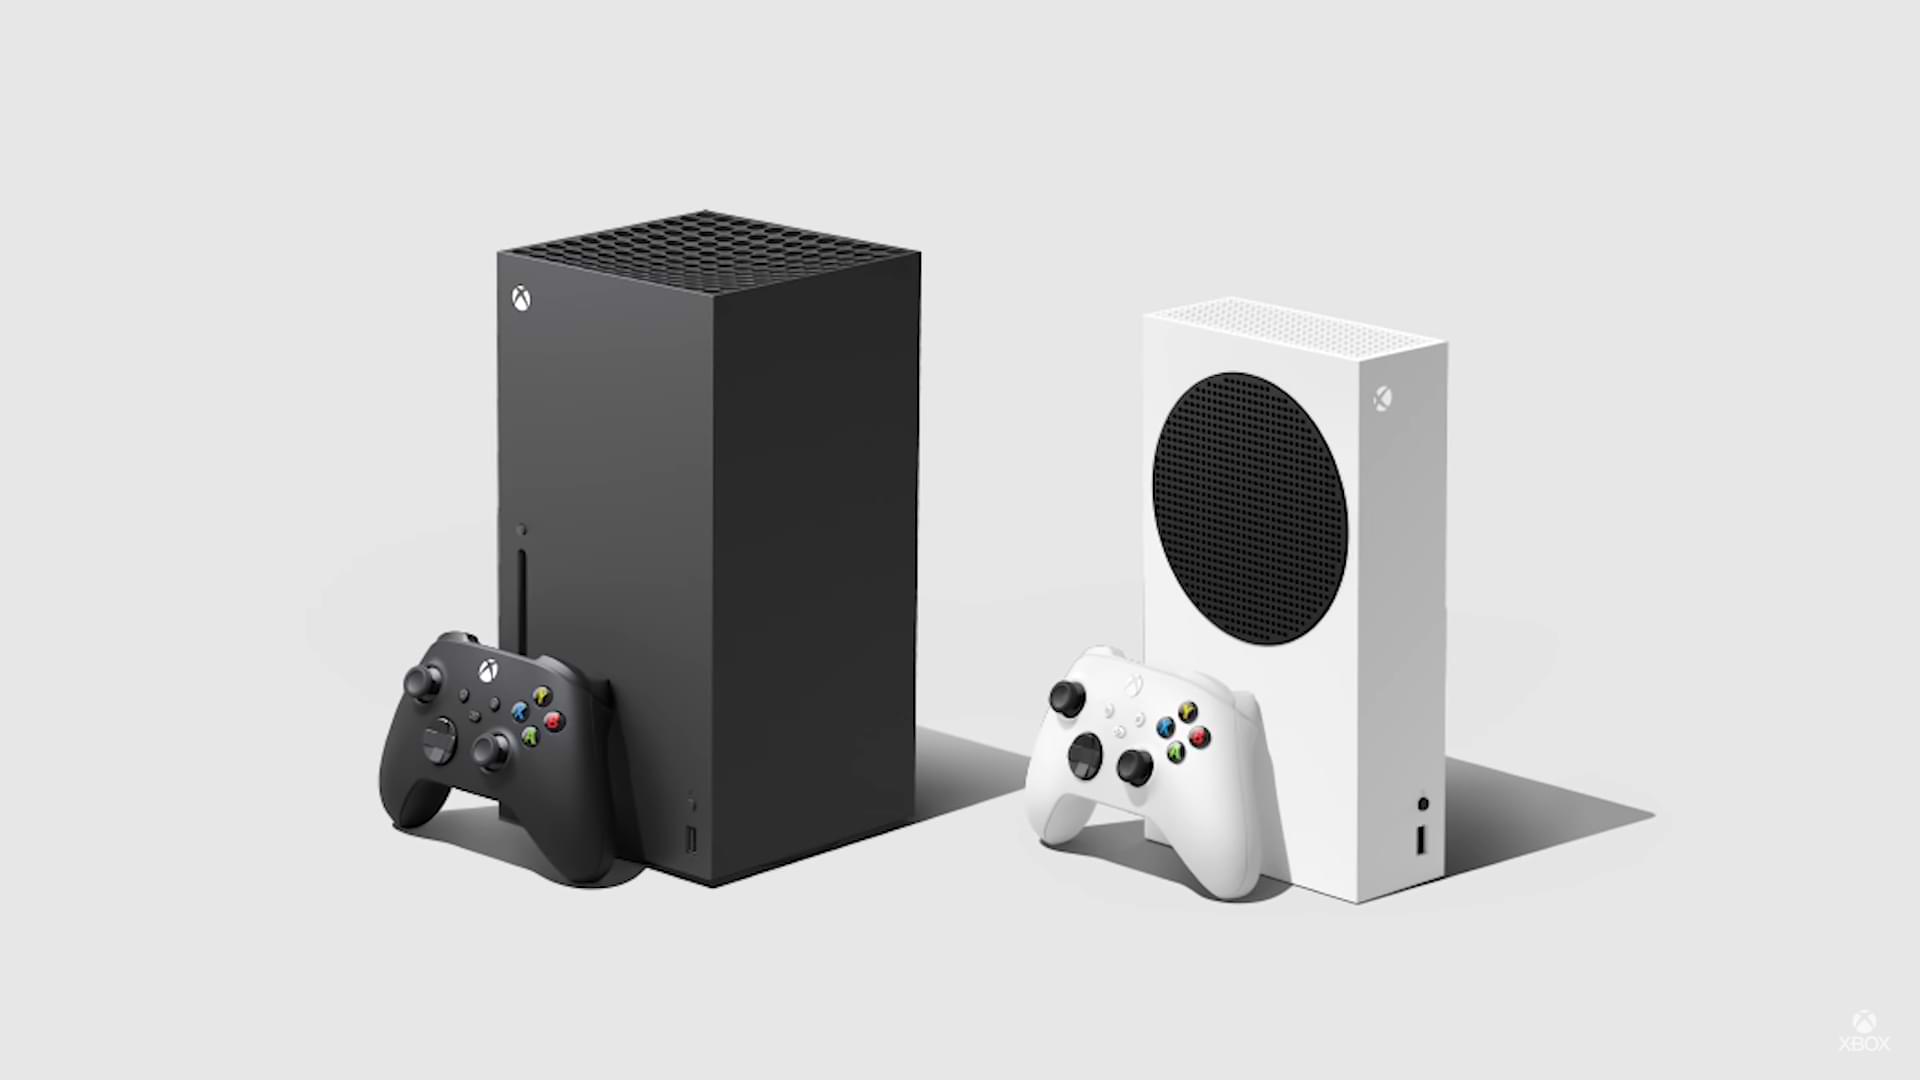 Microsoft Xbox Series X and S are the only next-gen consoles that support all RDNA2 features